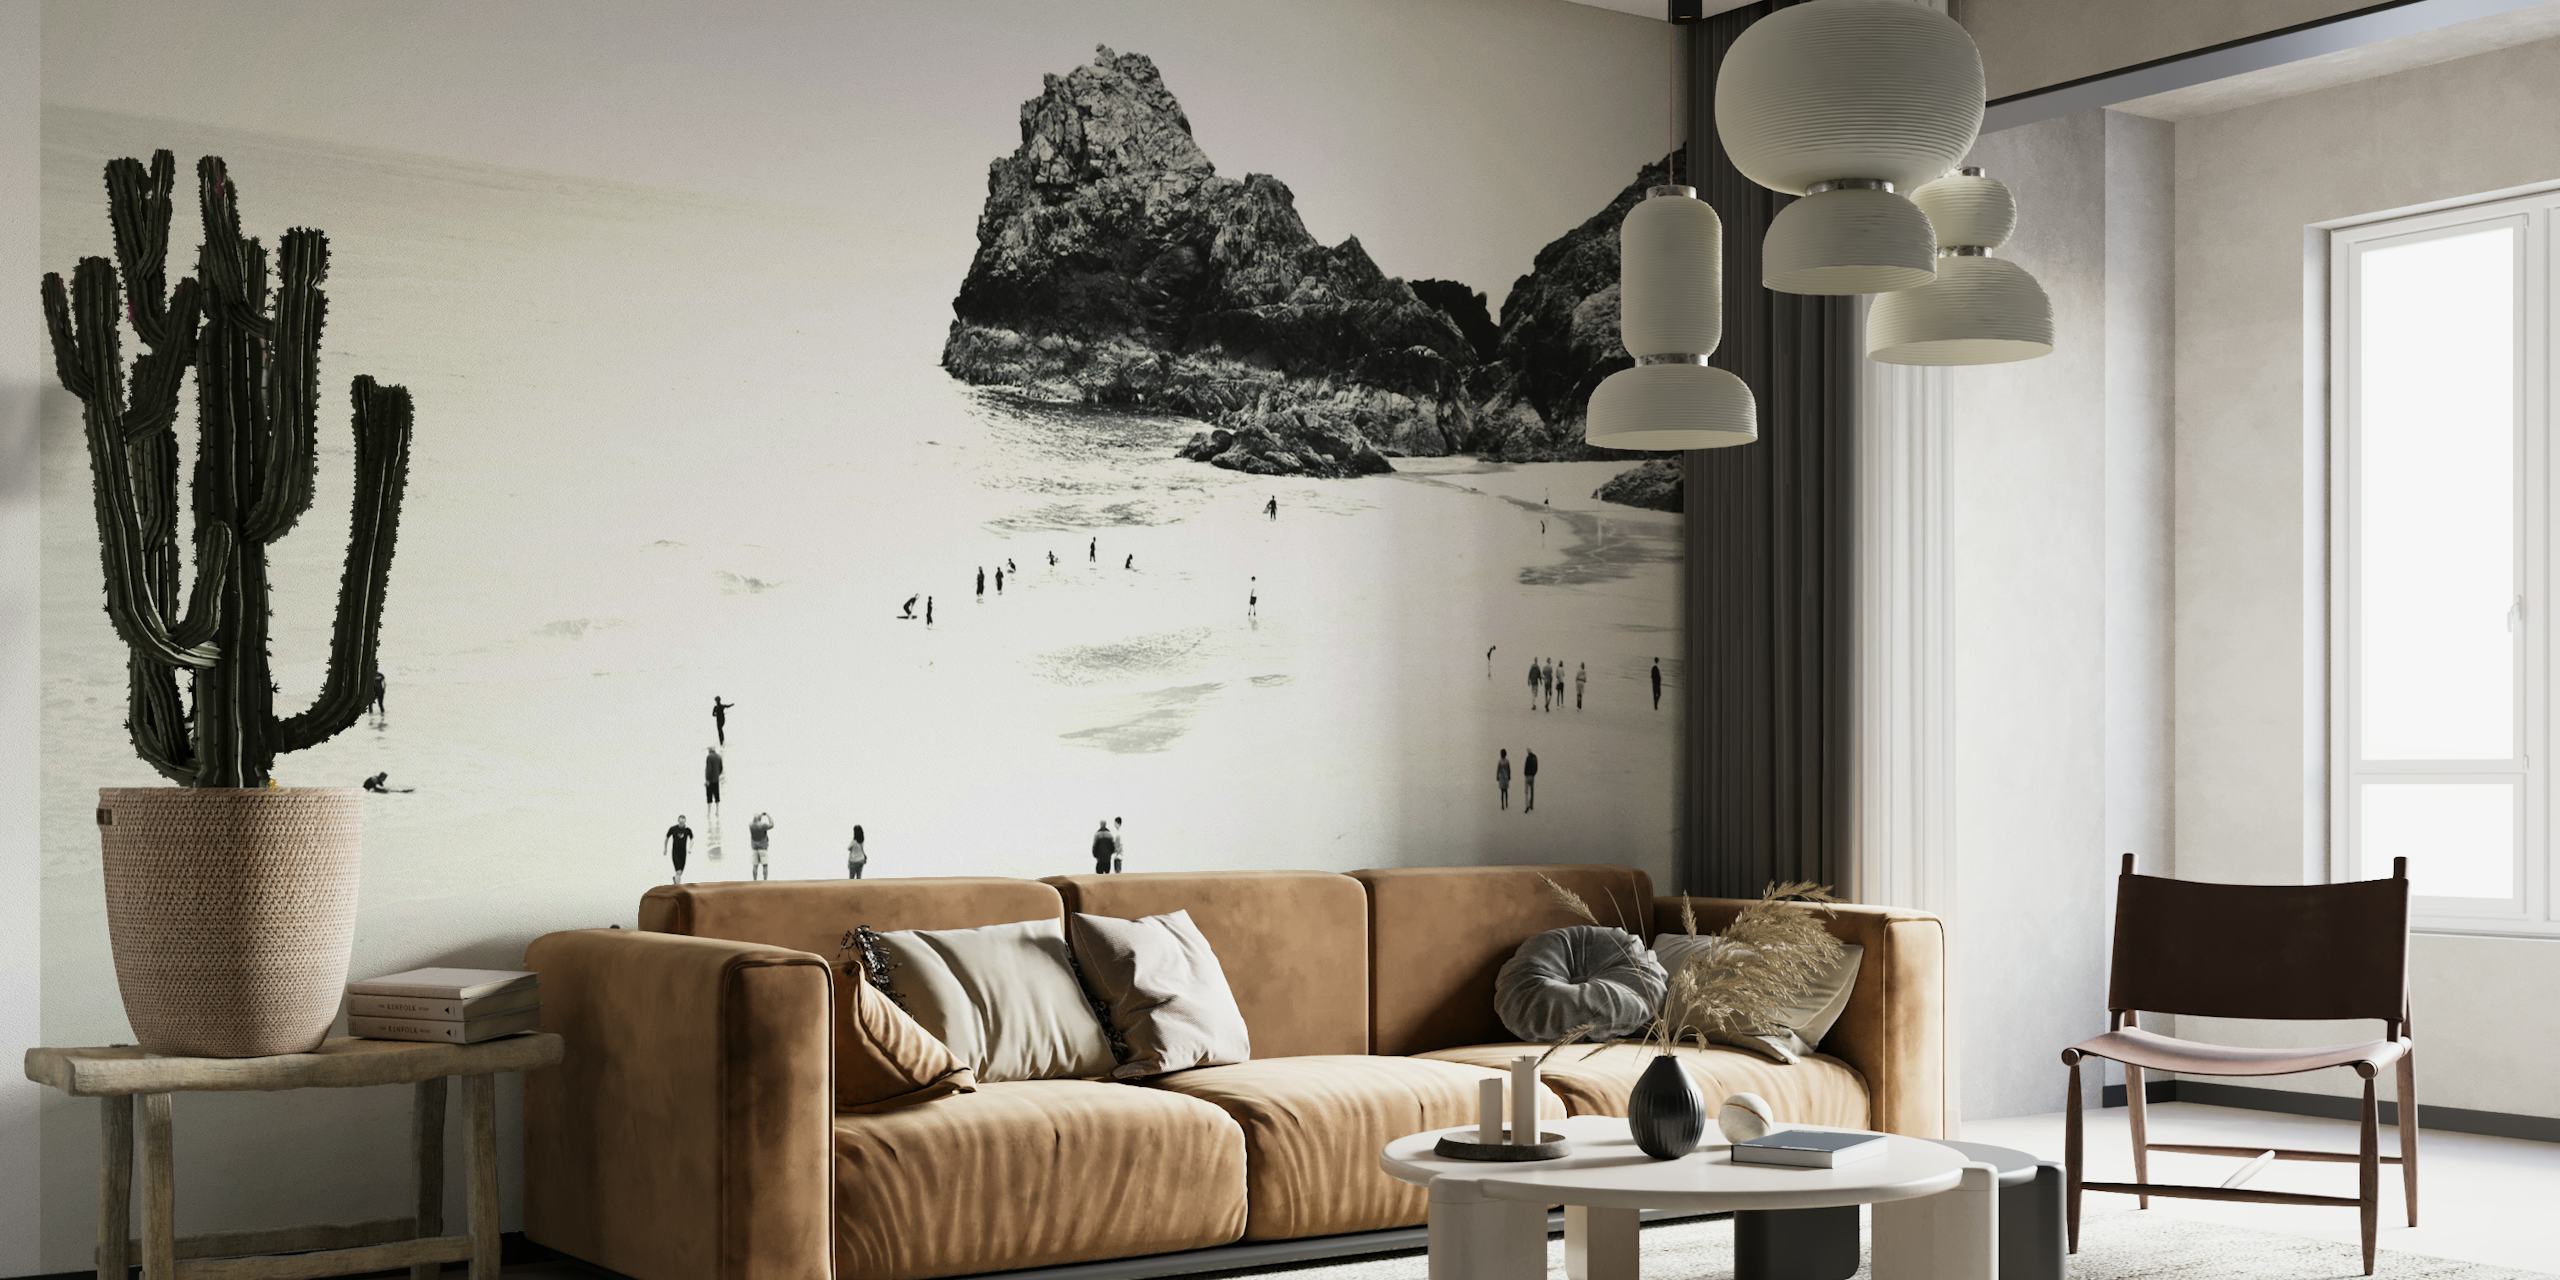 Monochrome beach scene wall mural with cliff and silhouettes of people